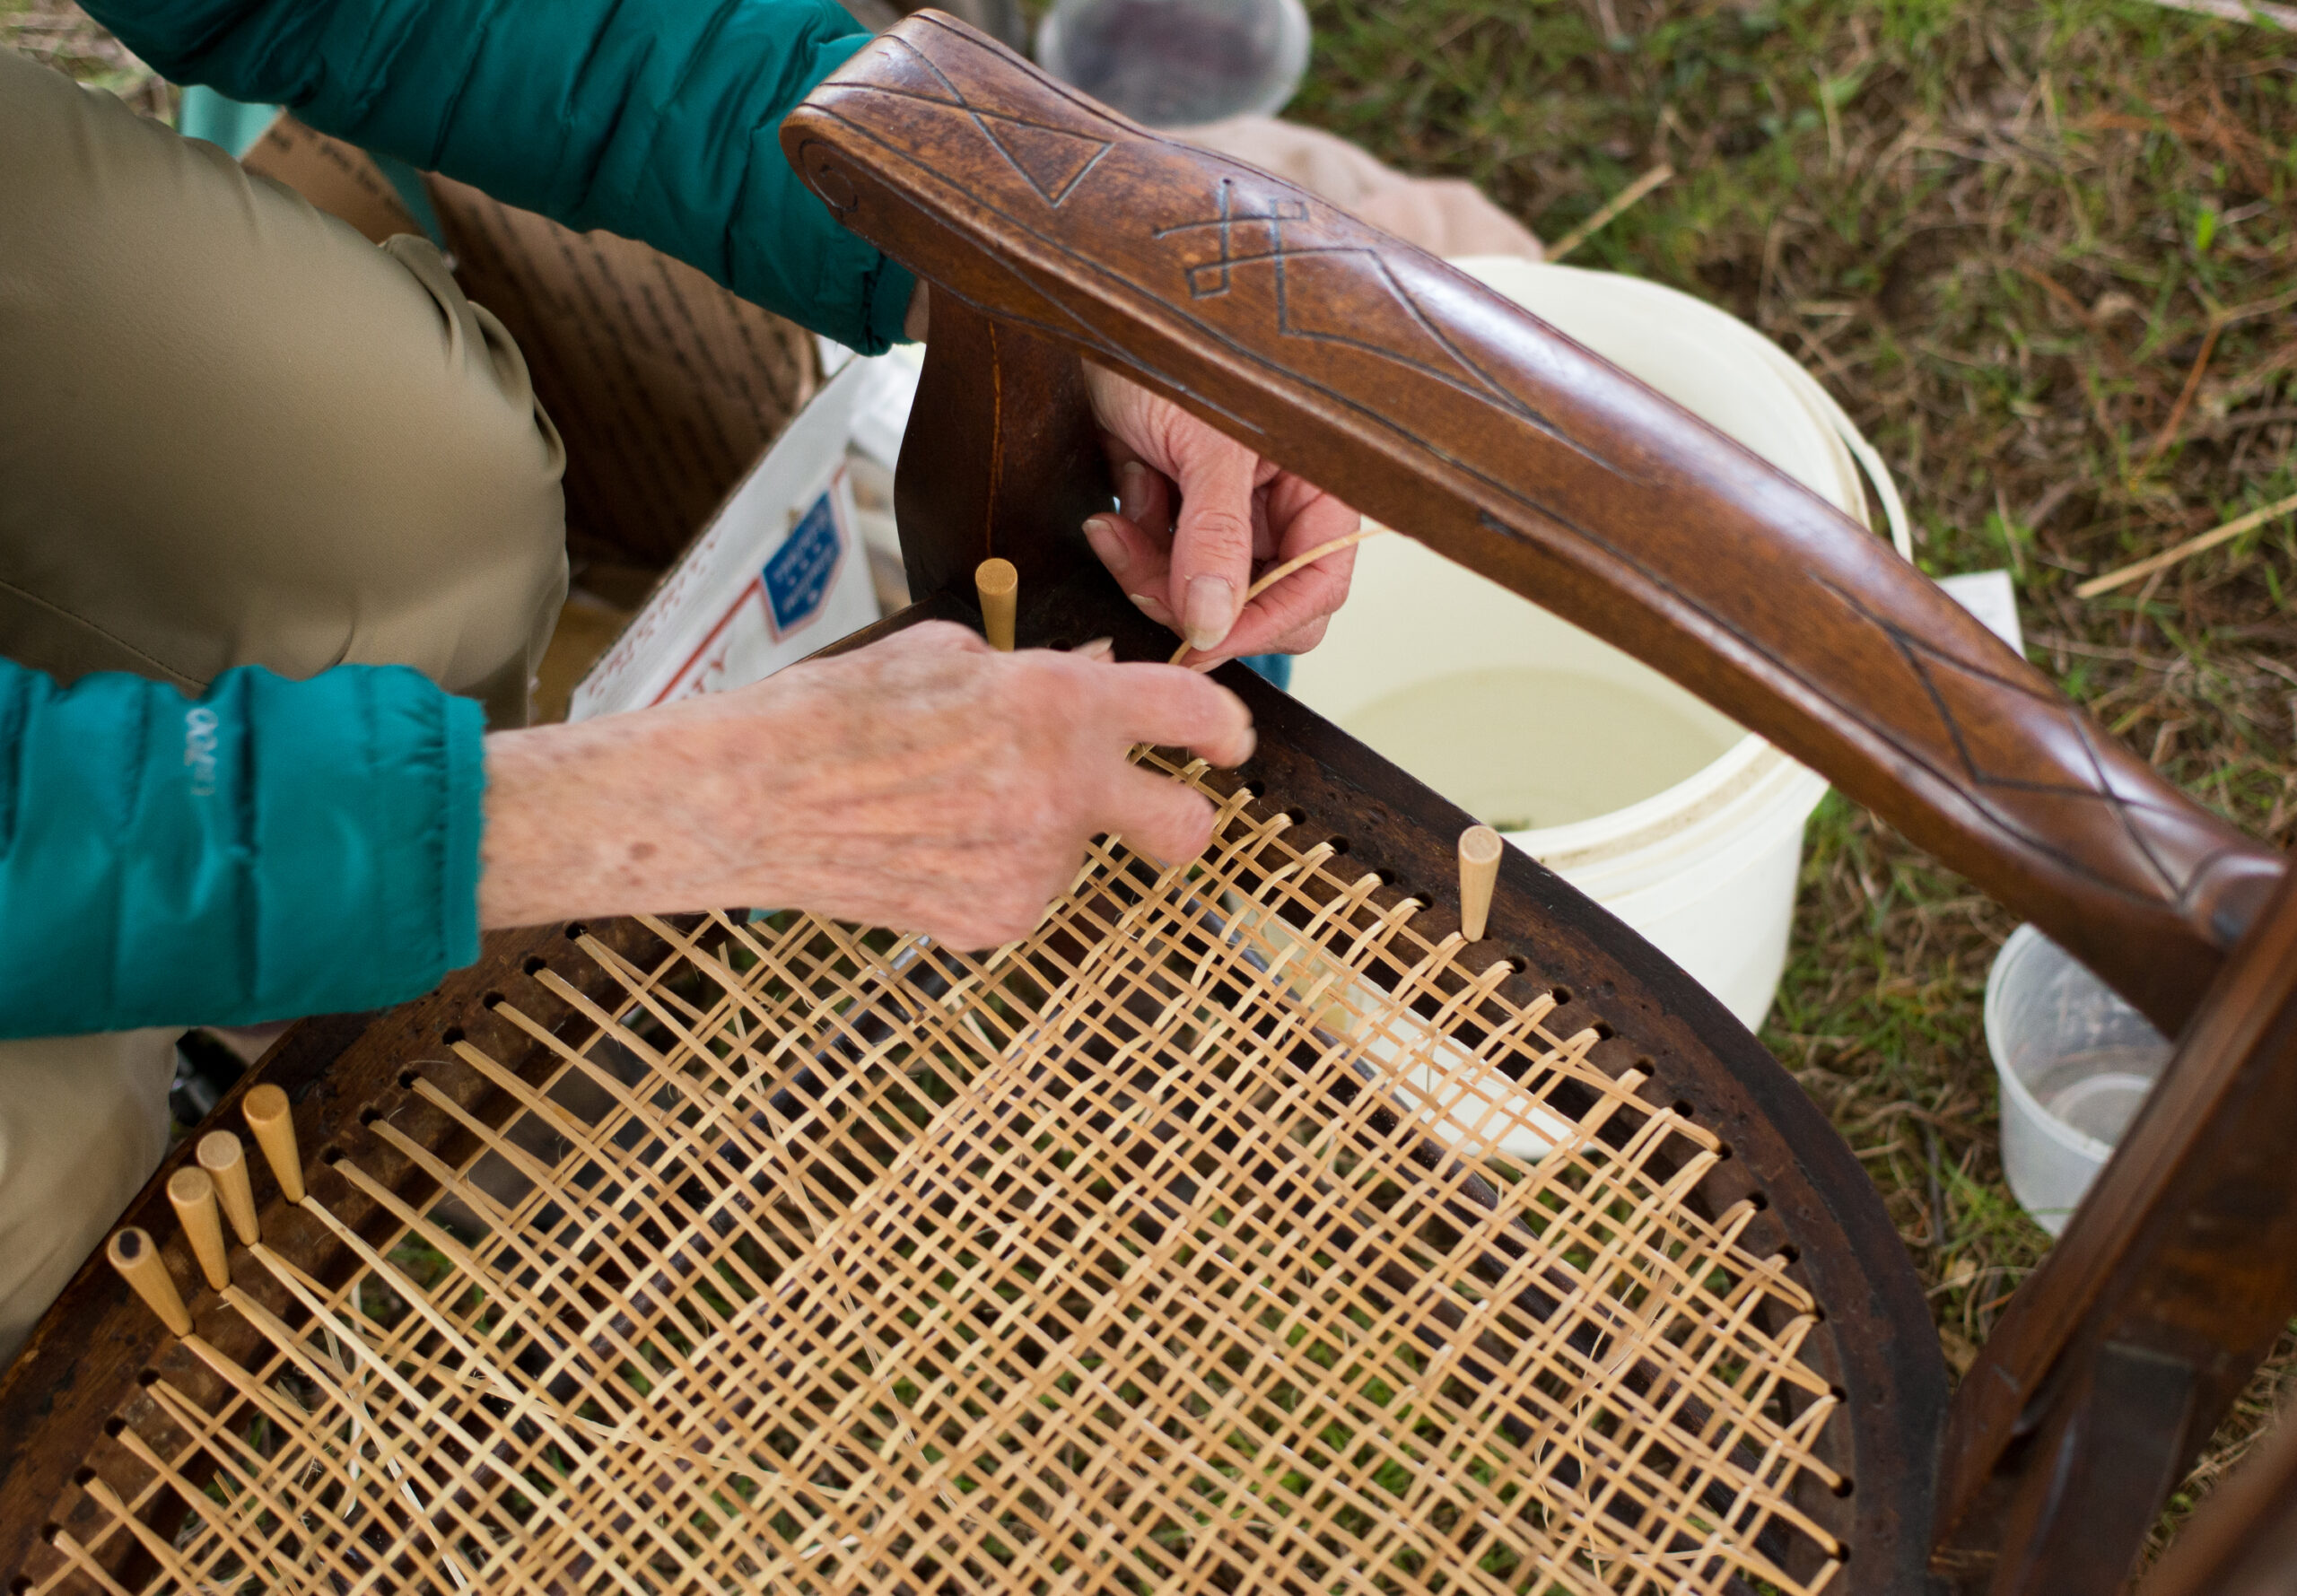 Woman repairs chair by caning the seat during Memorial Day Weekend at The Greater Rochester Heritage Days Festival.